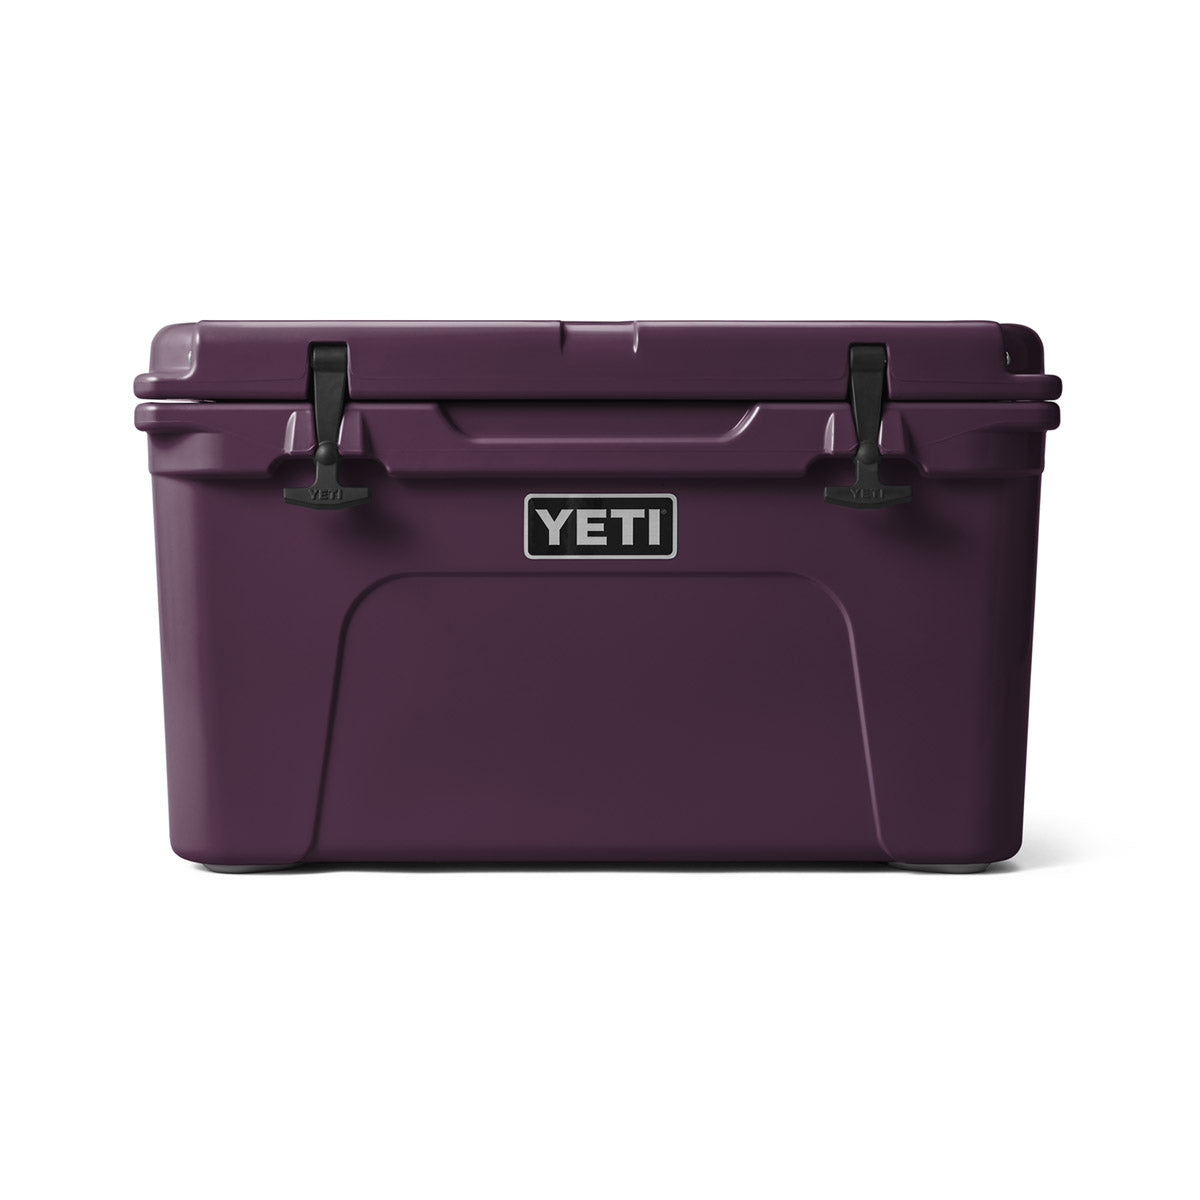 Camp green and cosmic lilac : r/YetiCoolers